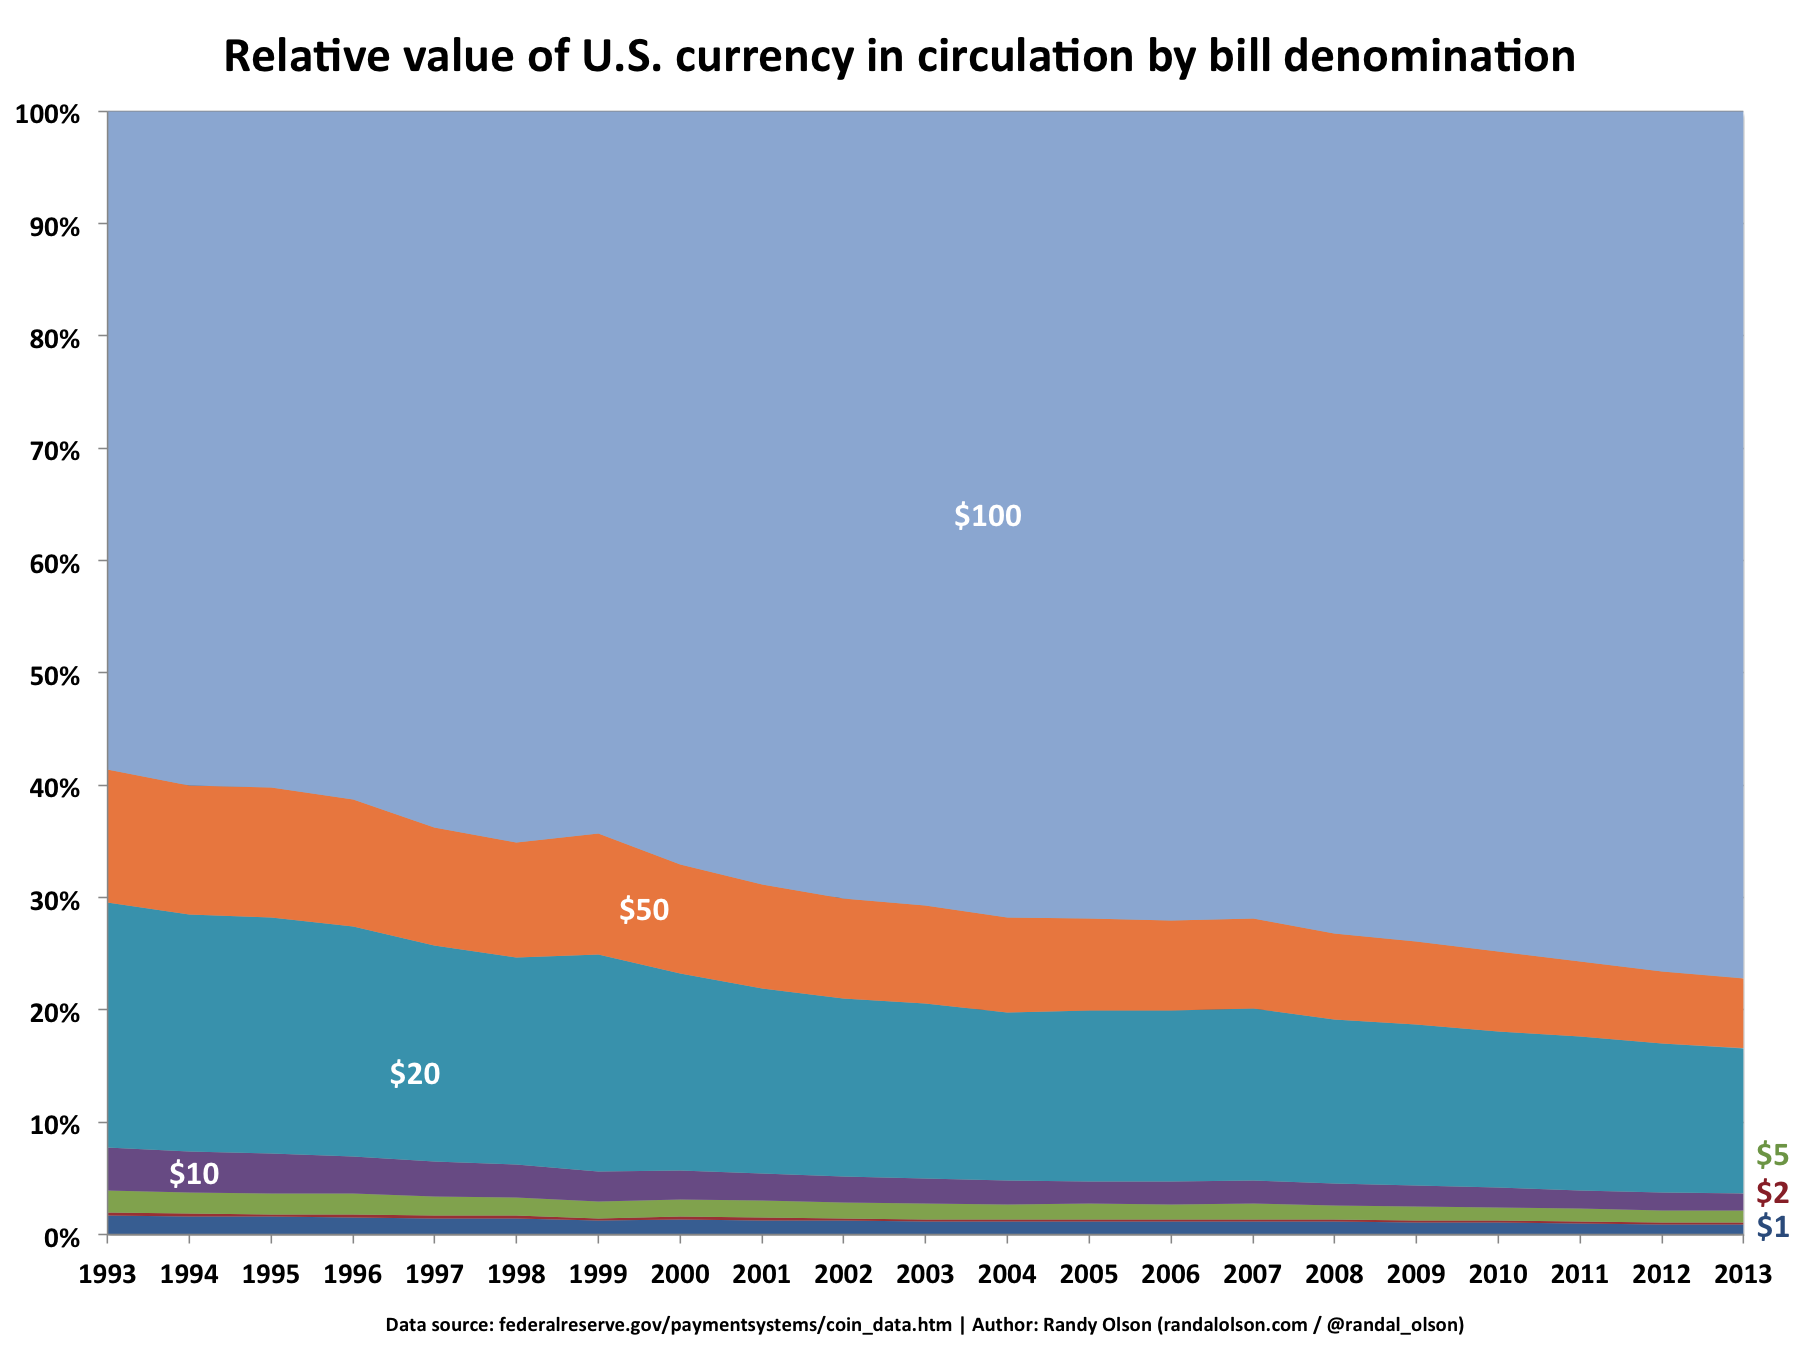 dolla-dolla-bill-y-all-relative-volume-and-value-of-u-s-currency-in